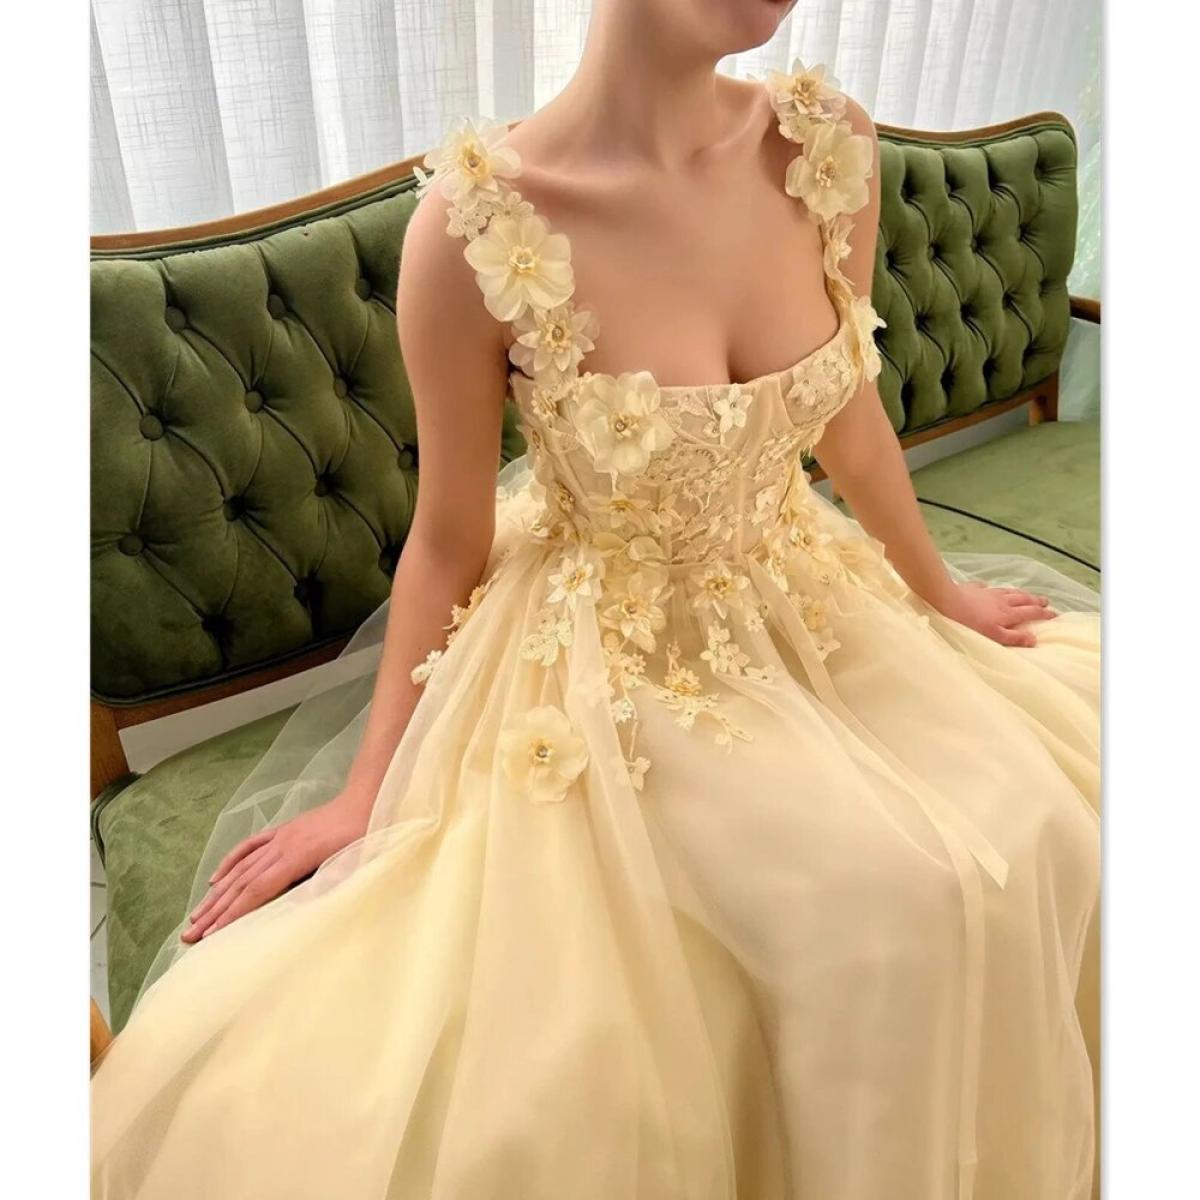 Ladies Dresses For Special Occasions Woman Evening Party Dress Women Elegant Luxury Robe Prom Gown Formal Long Suitable 